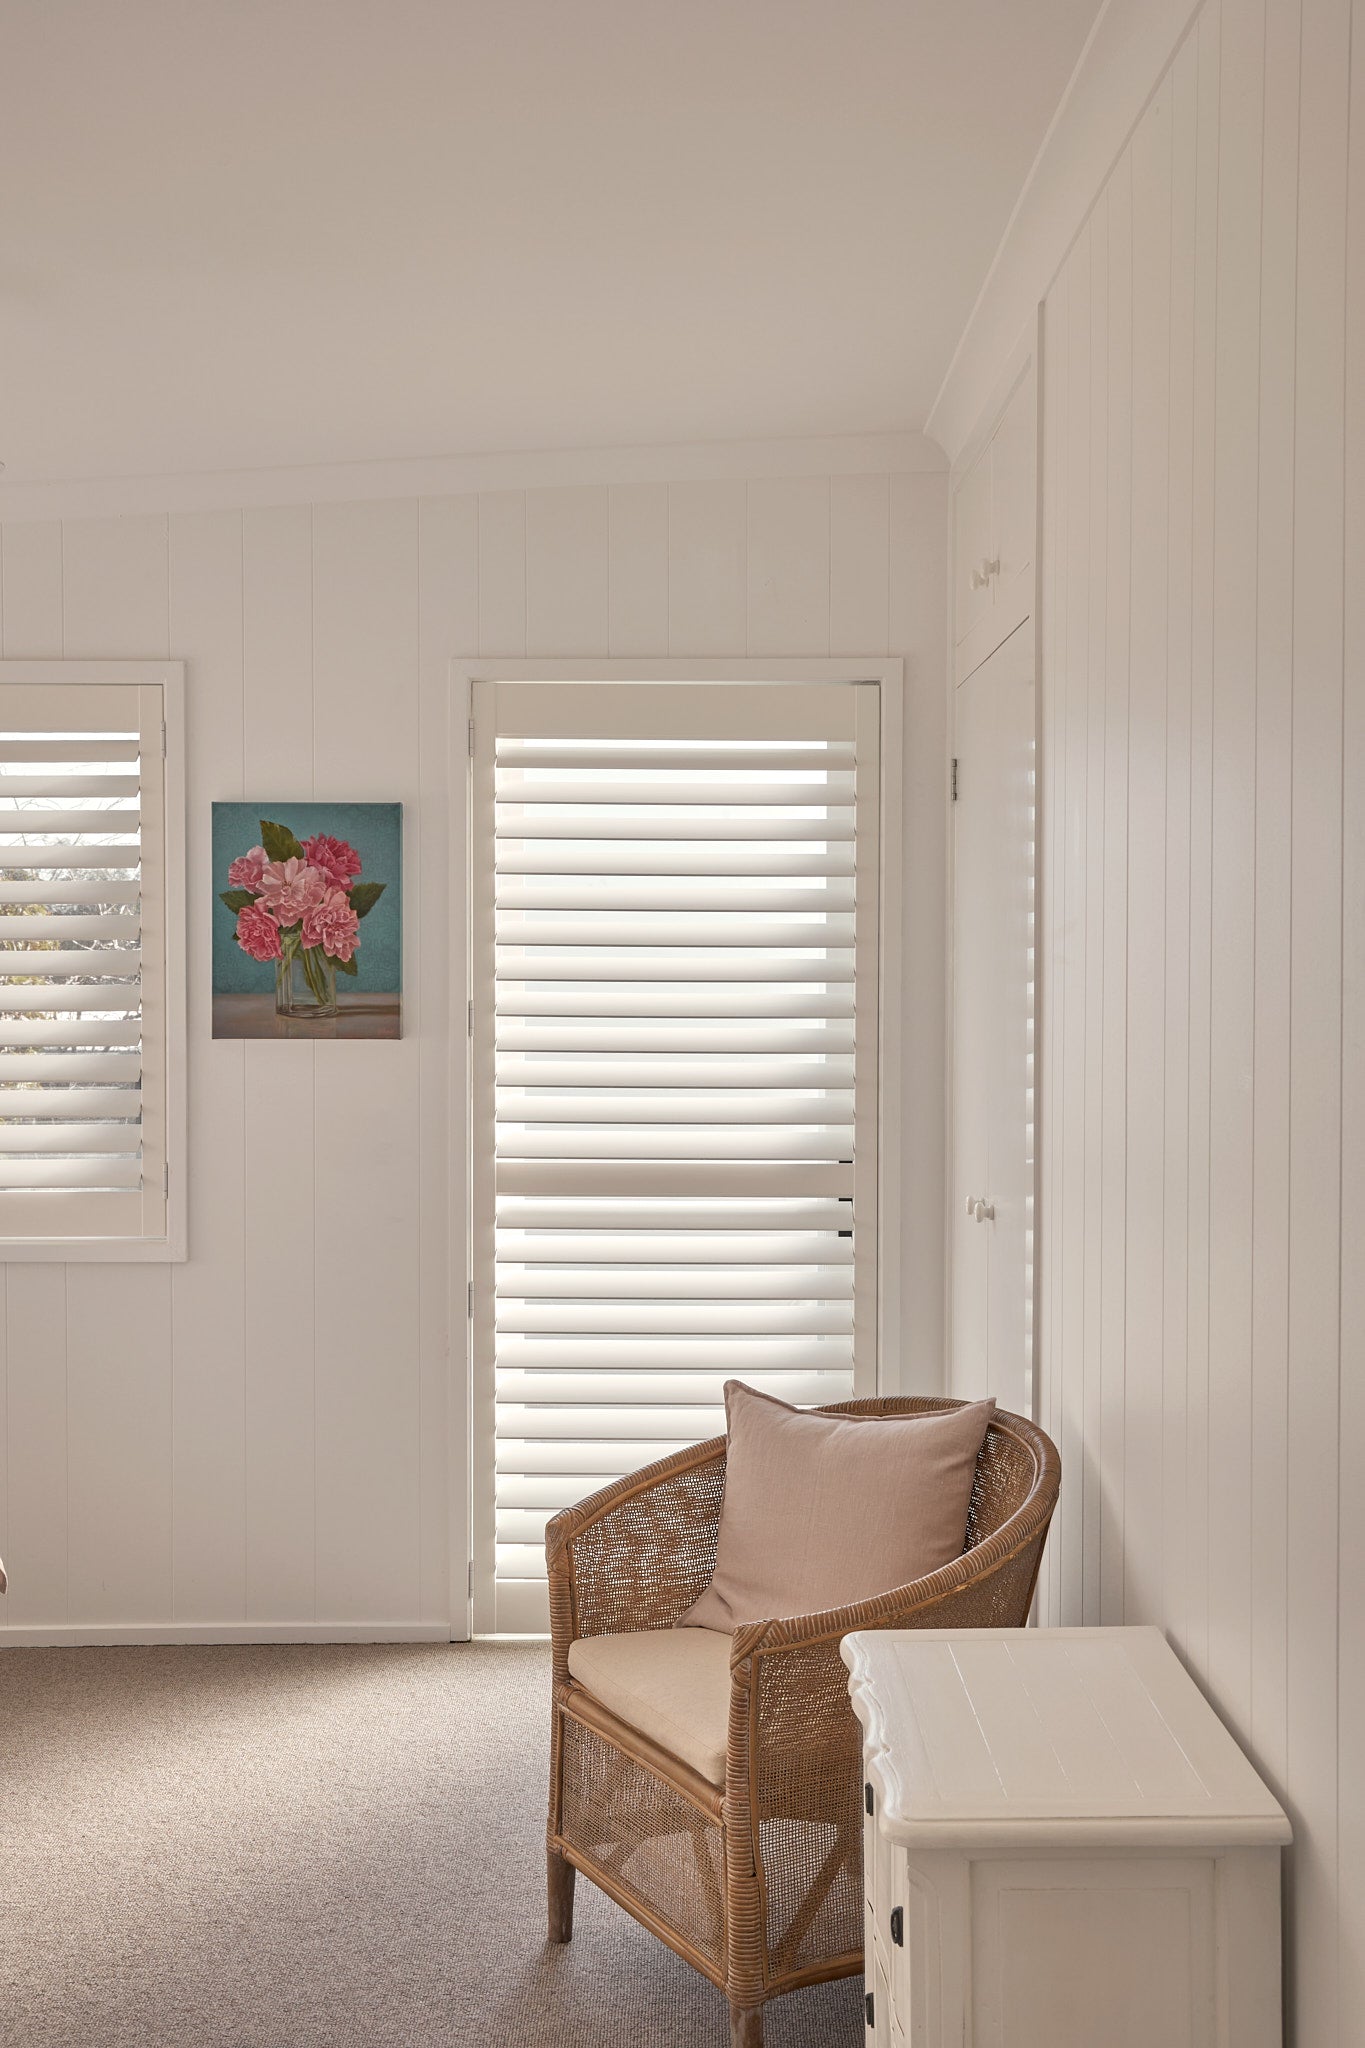 Transform Your Room with Plantation Shutters